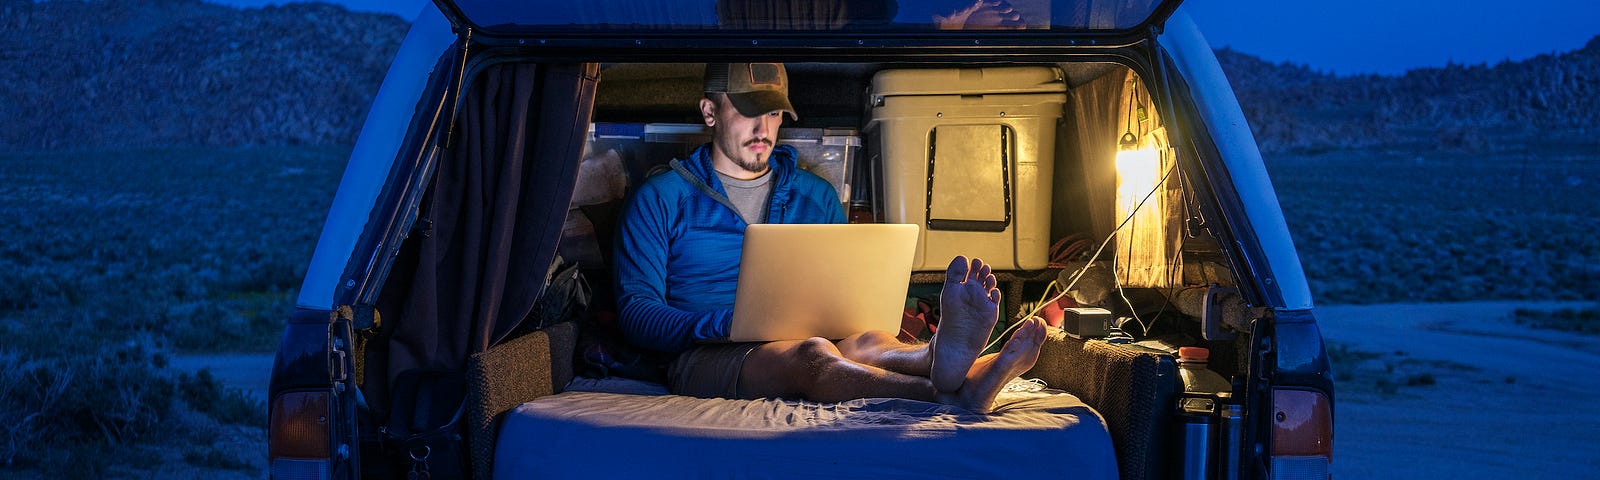 A person working on a laptop in the back of a covered pickup truck at night, sitting on a mattress.